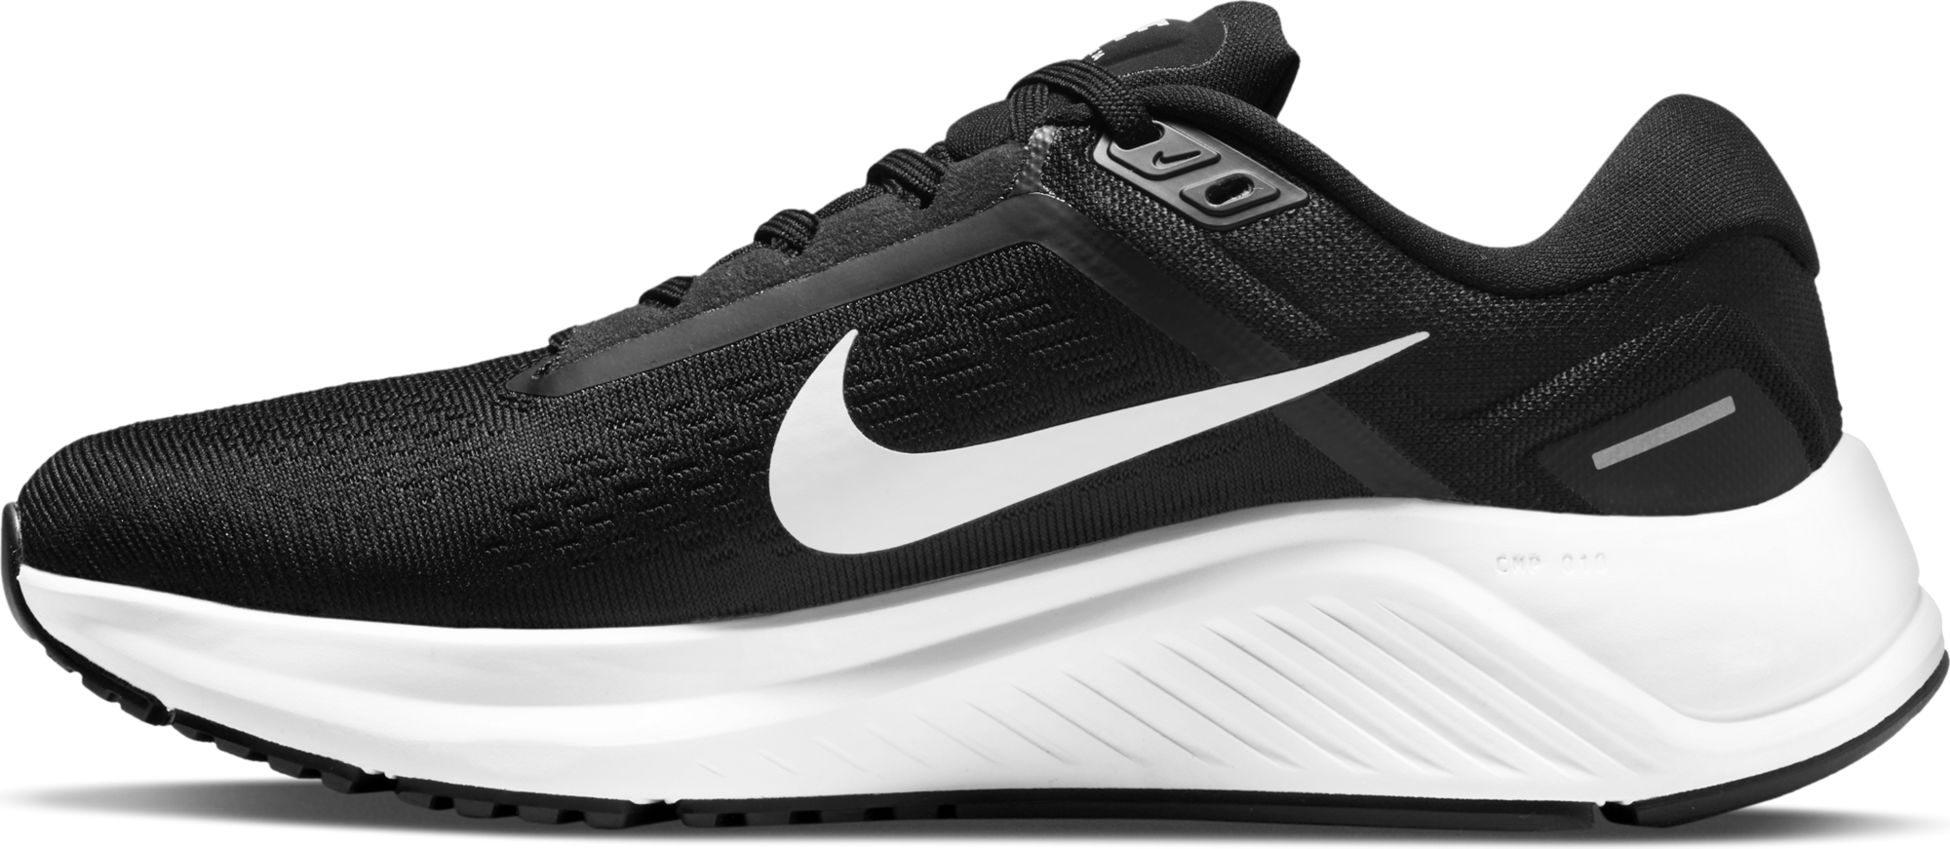 NIKE, W AIR ZOOM STRUCTURE 24